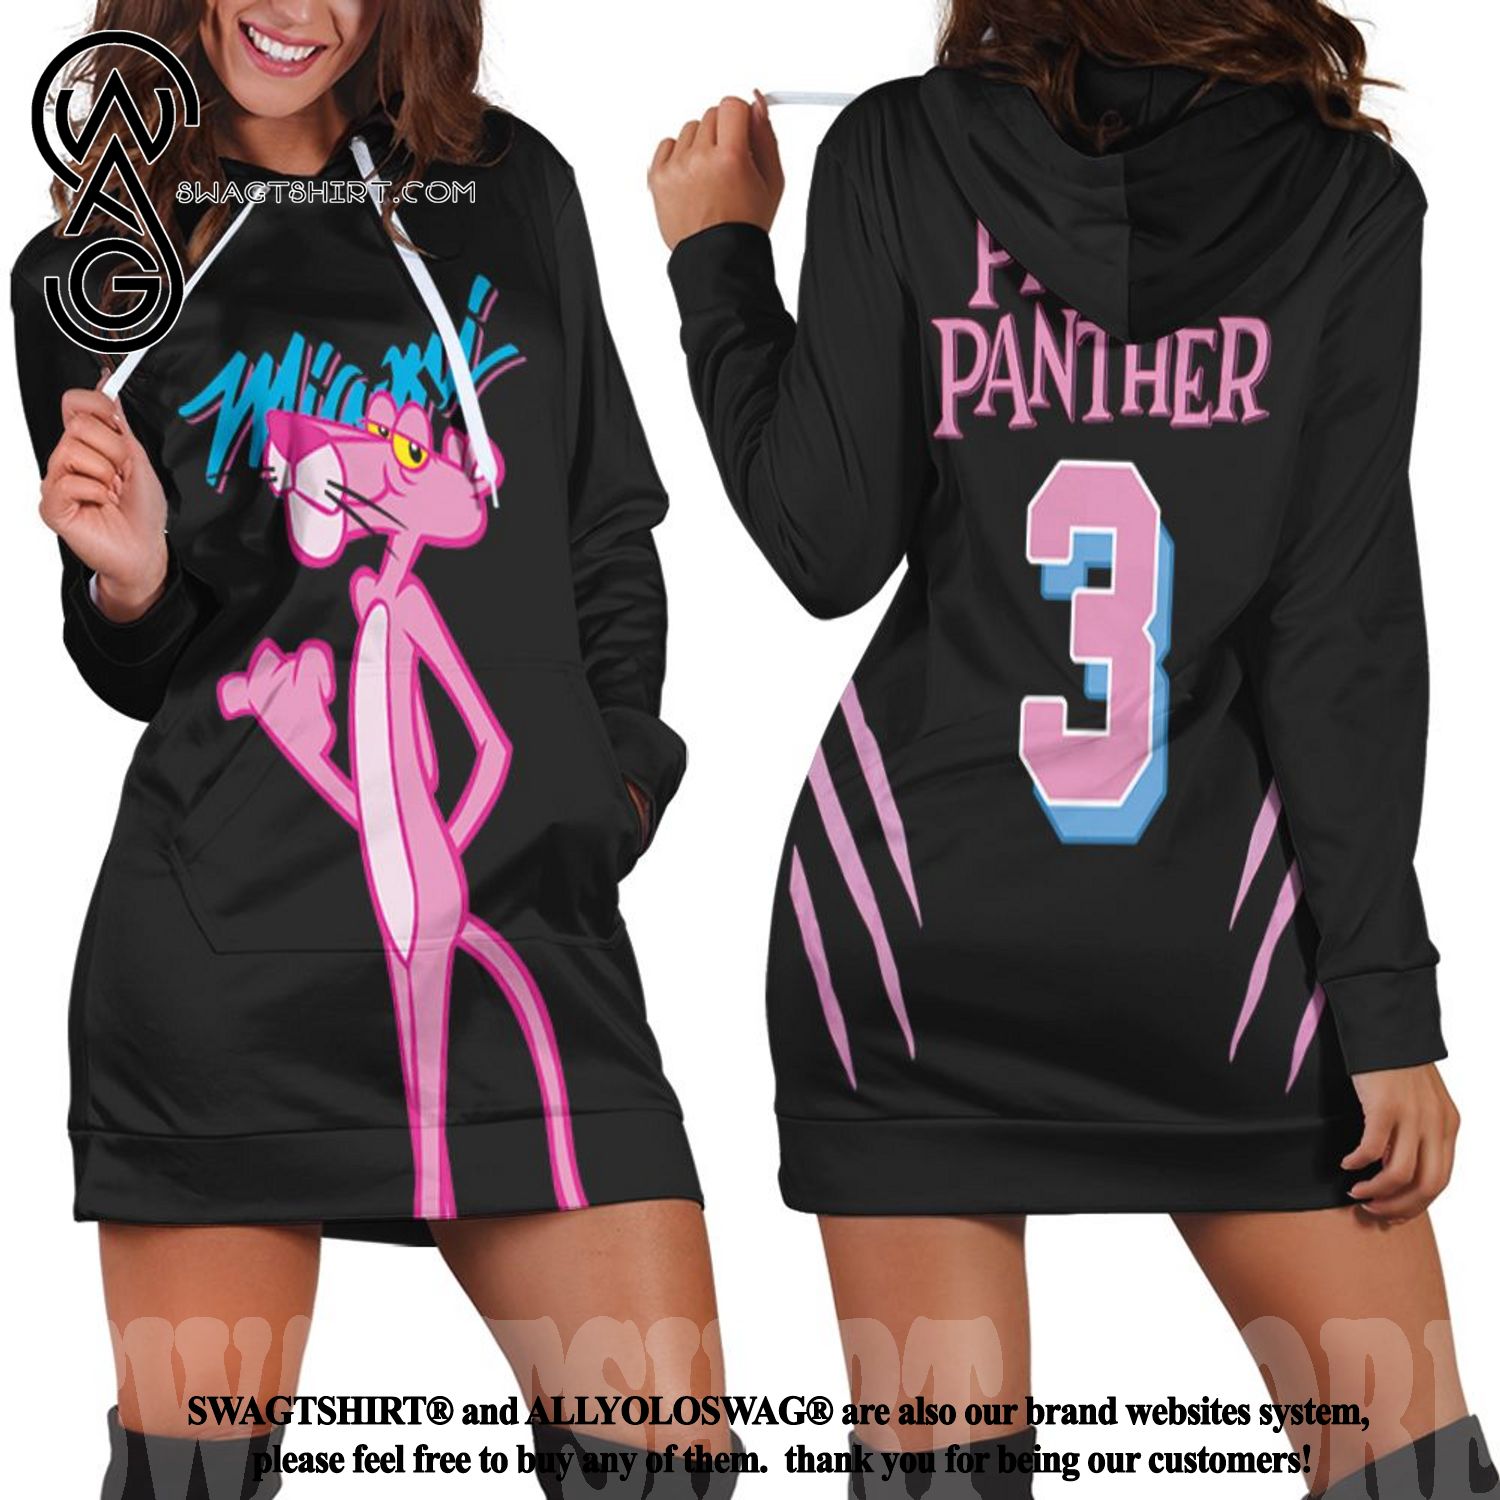 Best Selling Product] Miami Heat X Pink Panther 3 Collection Black